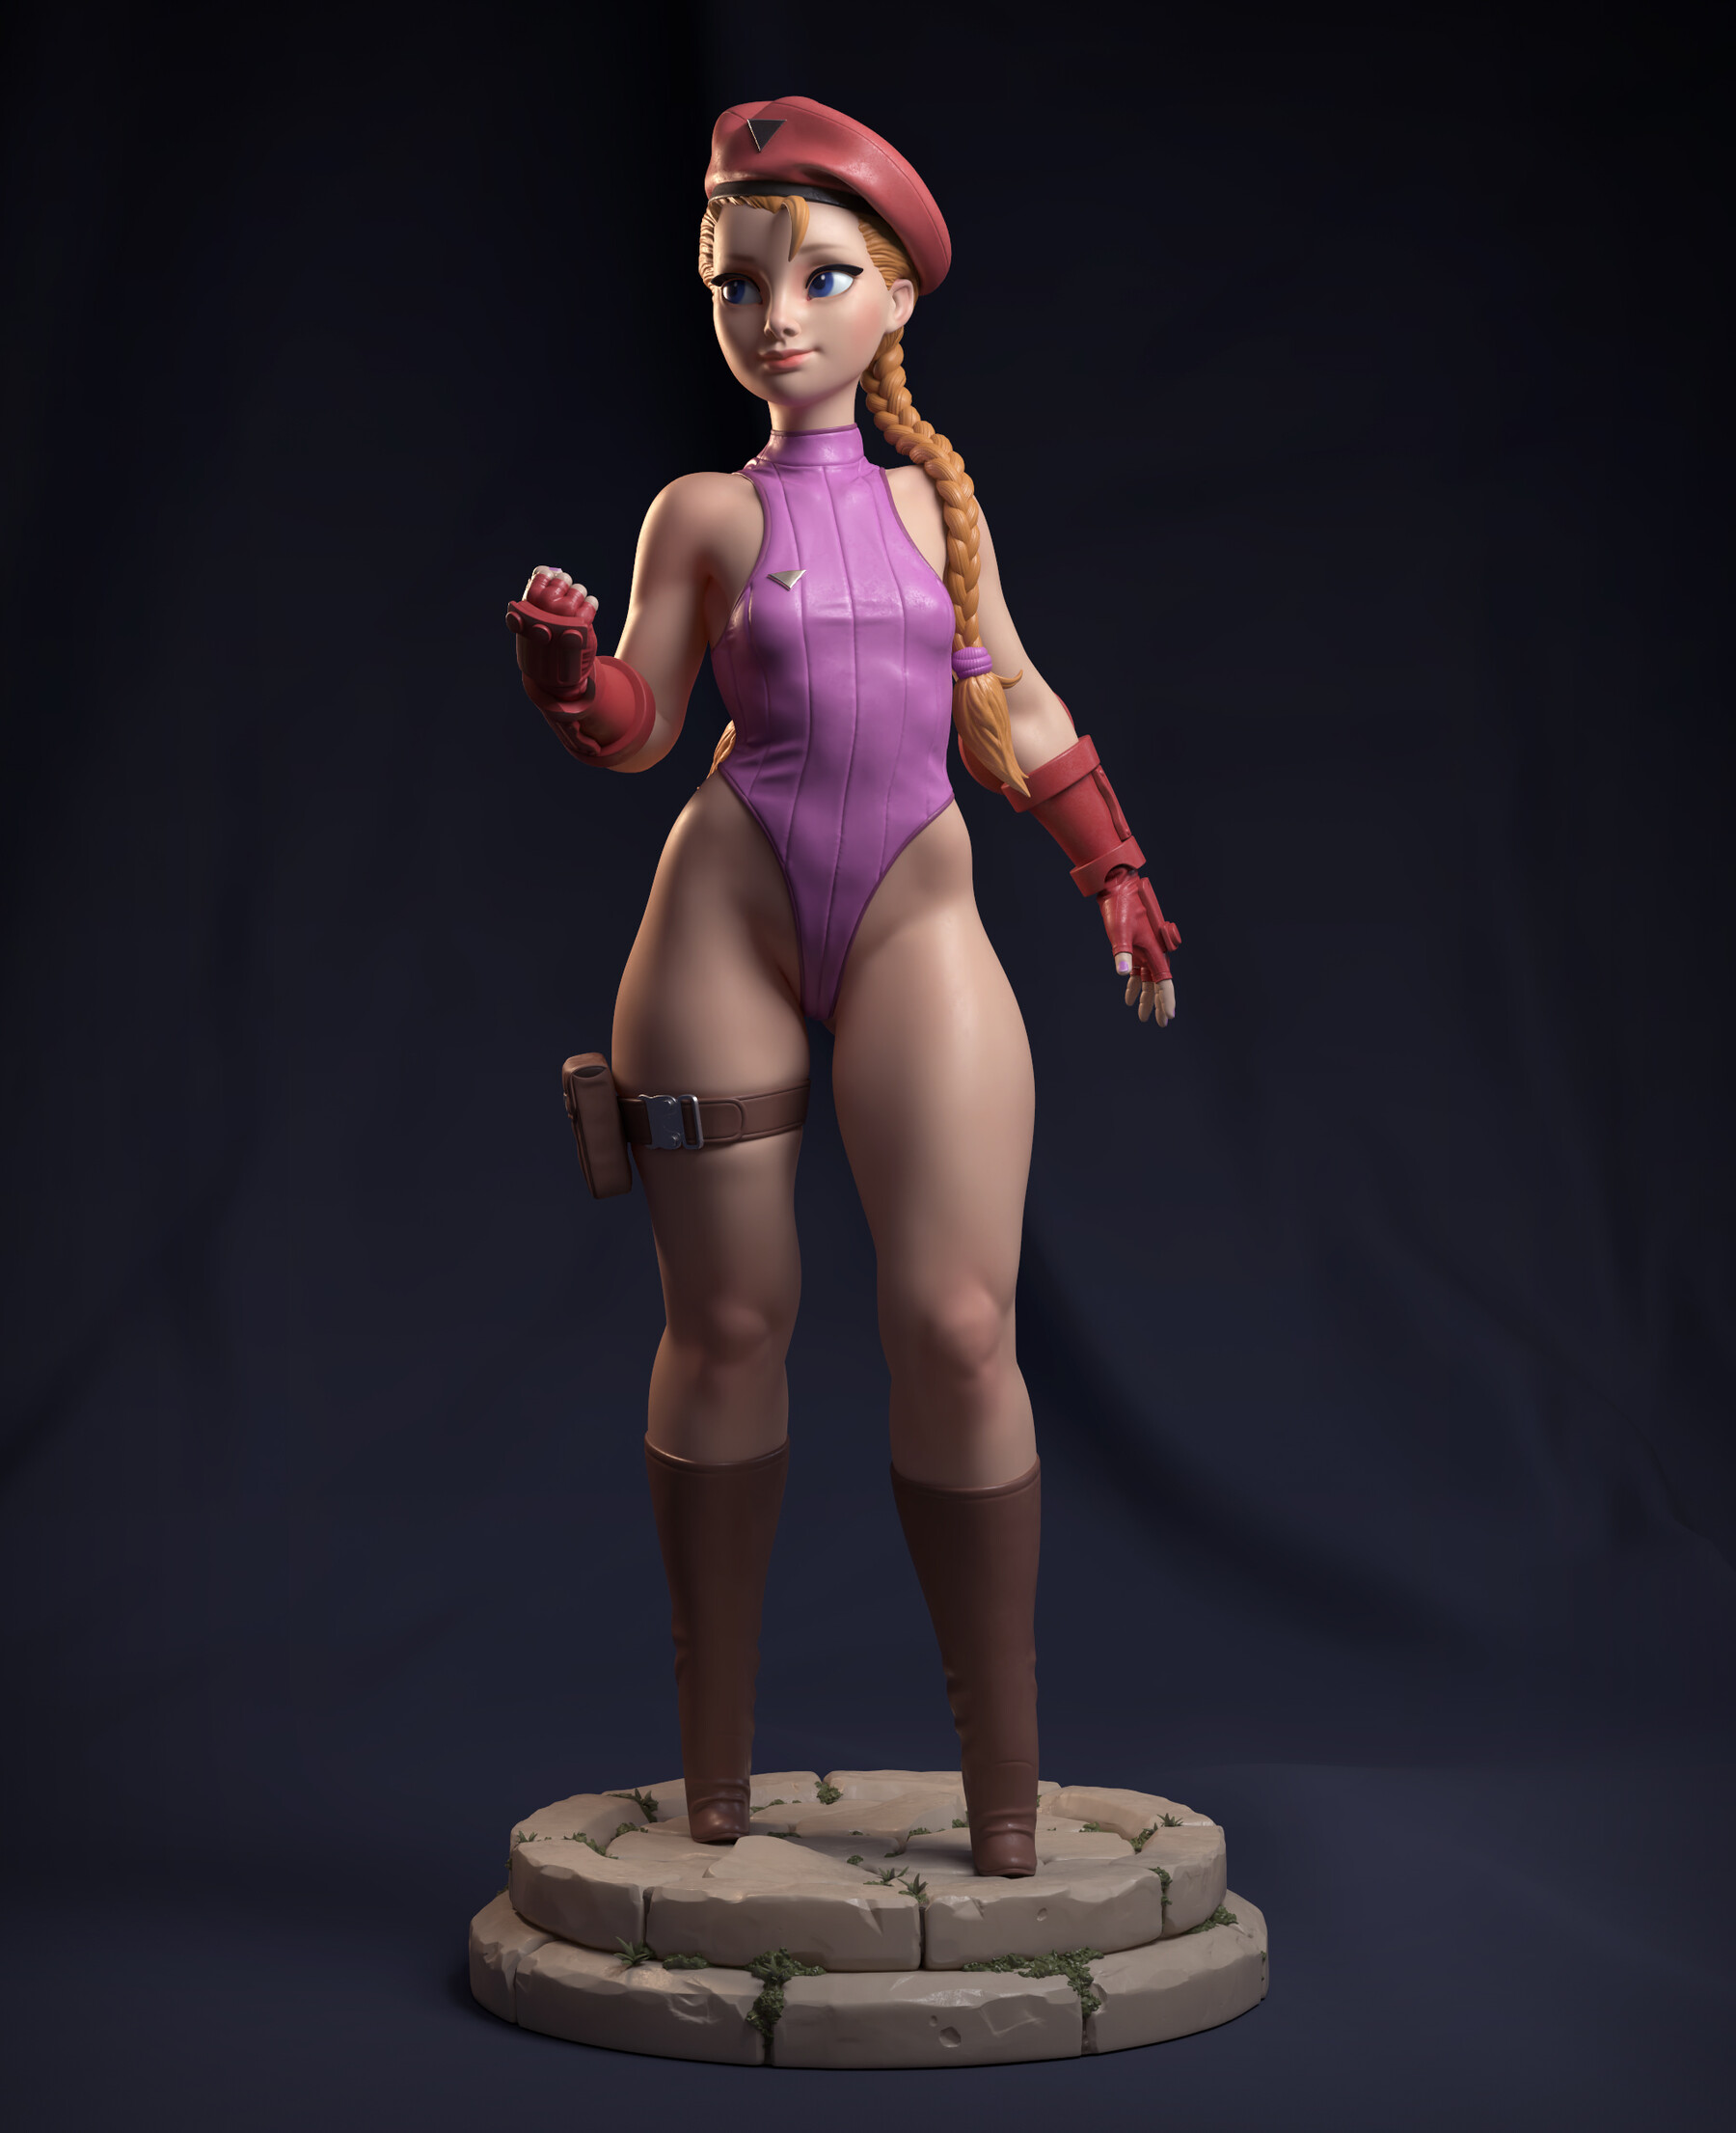 Anime Cammy White Unpainted GK Models Resin Garage Kits 3D Printed Action Figure 